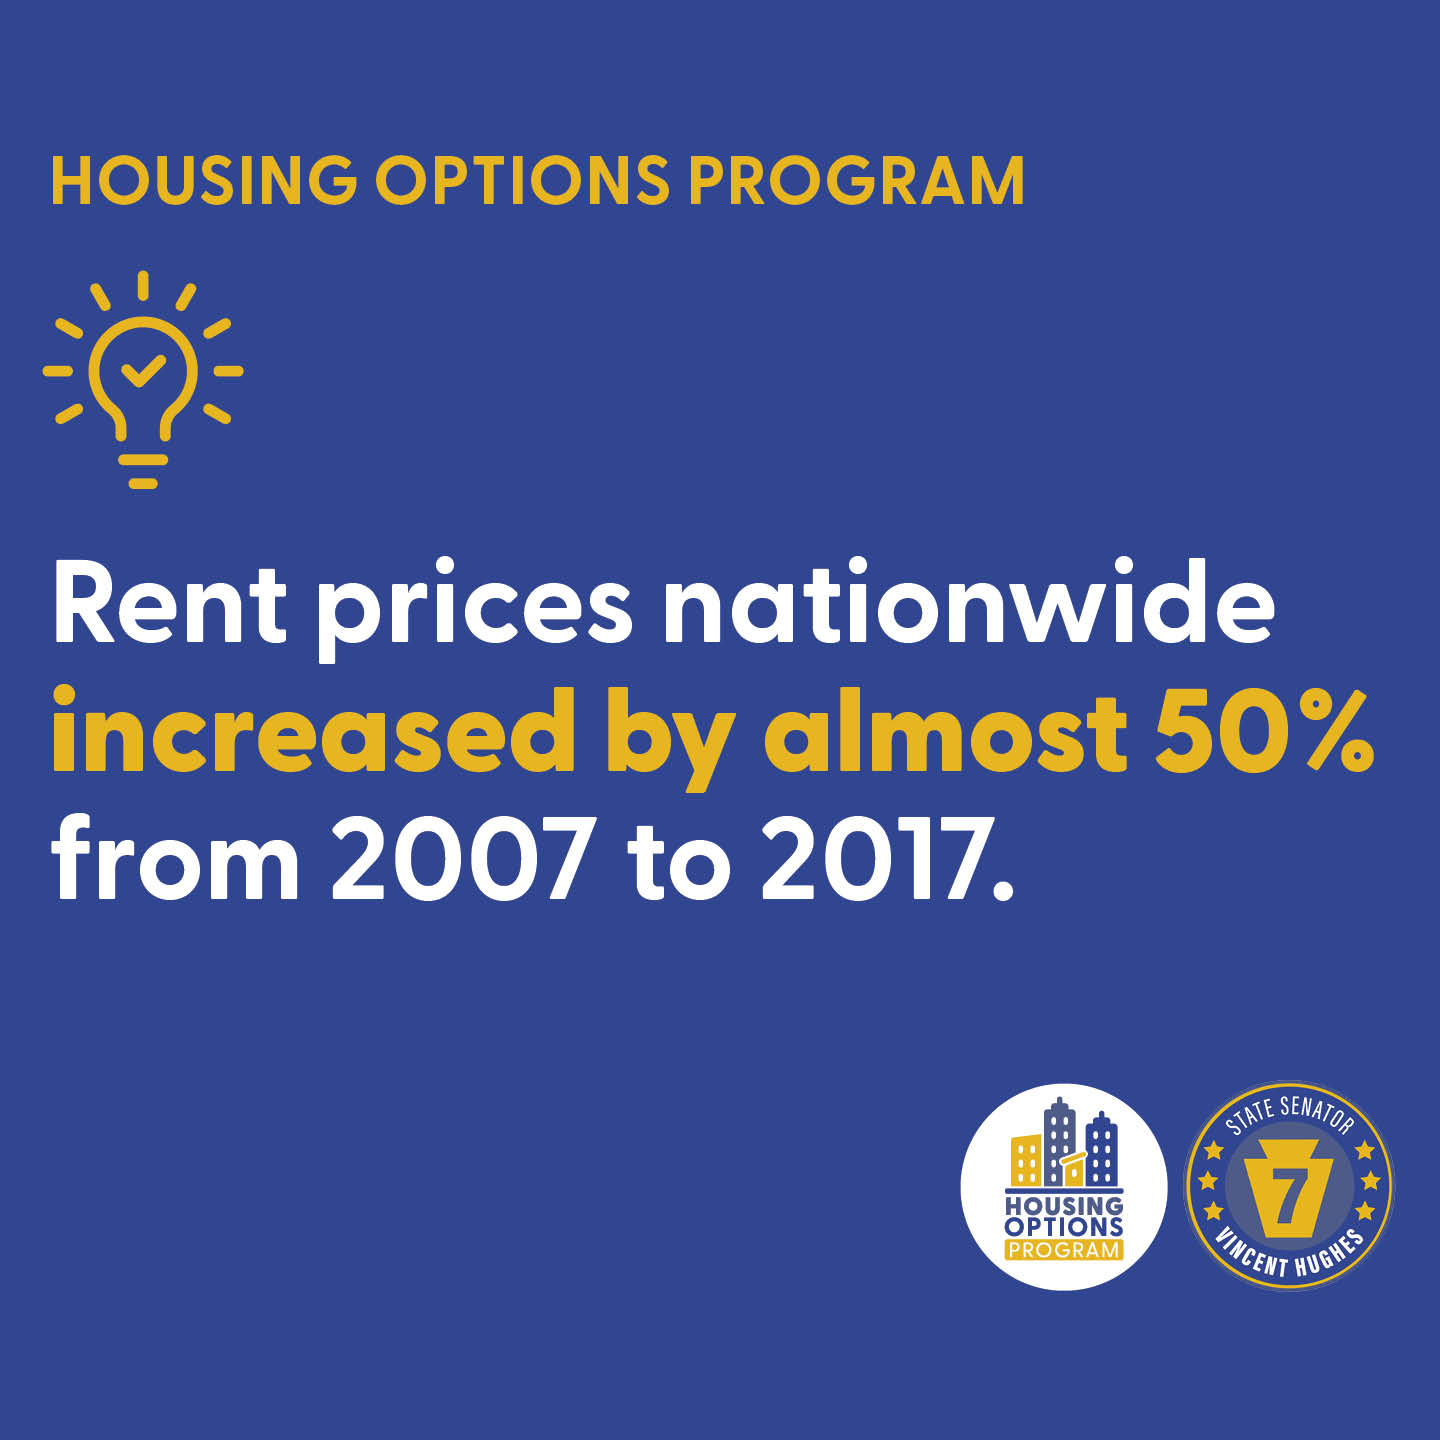 HOUSING OPTIONS PROGRAM - Rent prices nationwide increased by almost 50% from 2007 to 2017.